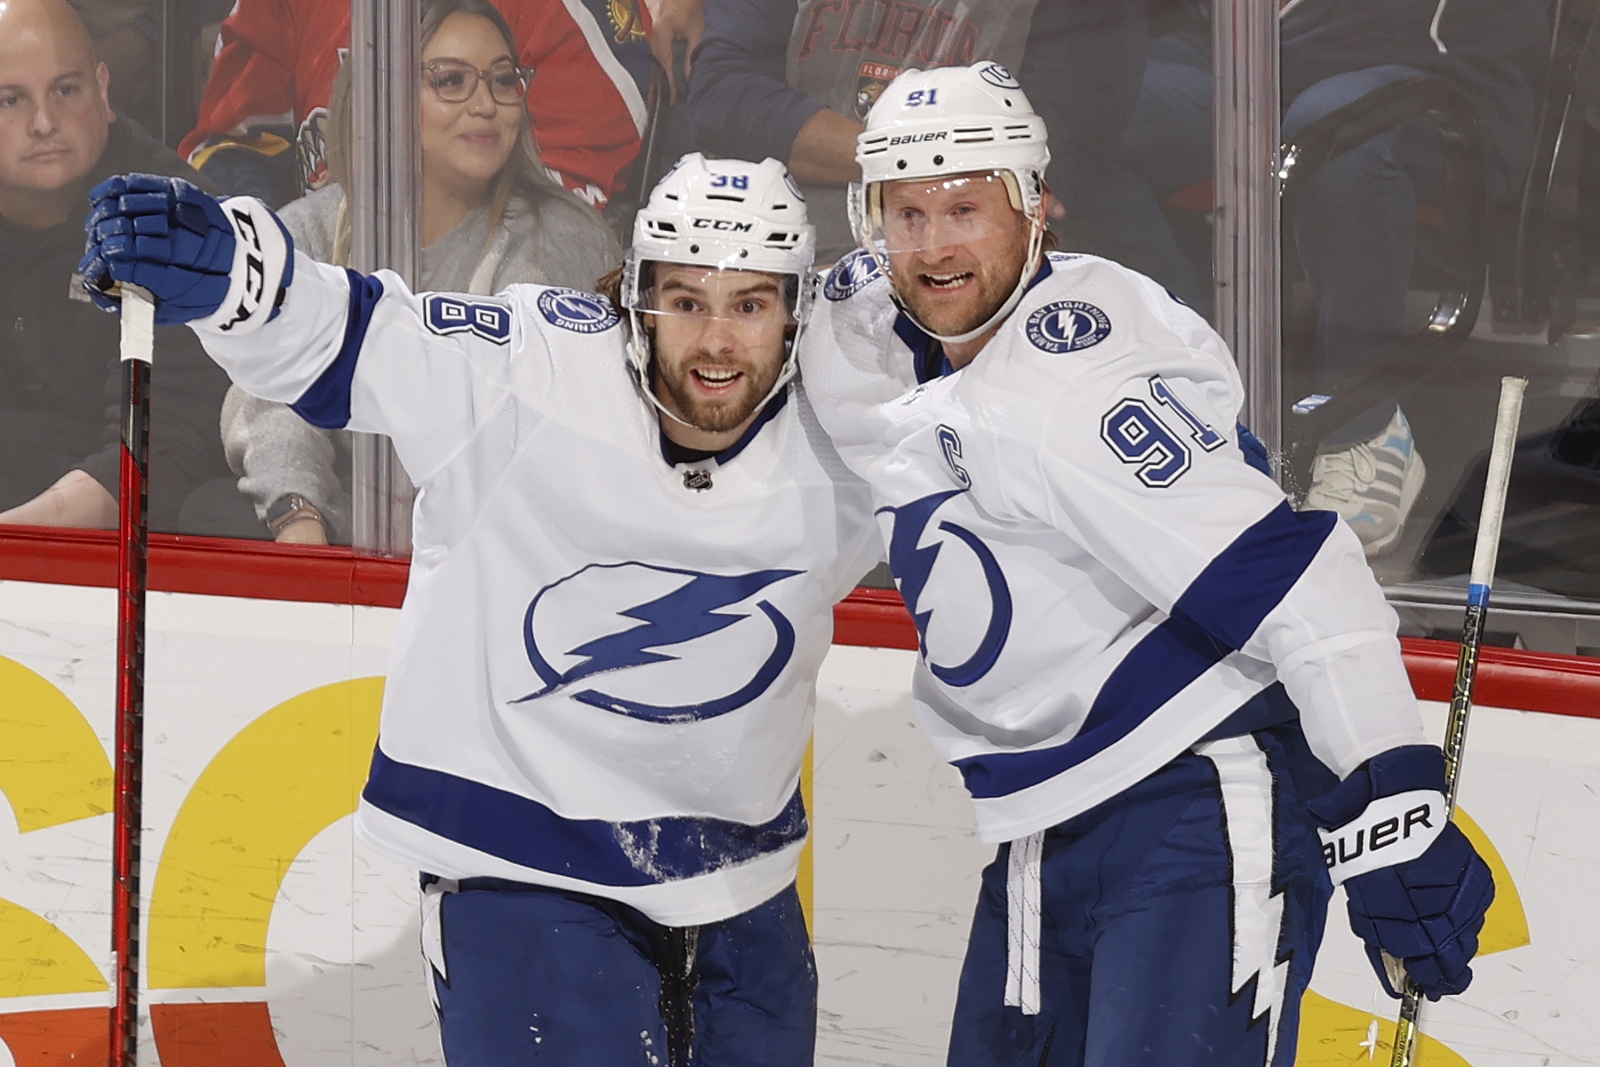 Lightning news: TB makes Brayden Point decision for Game 4 vs. Panthers